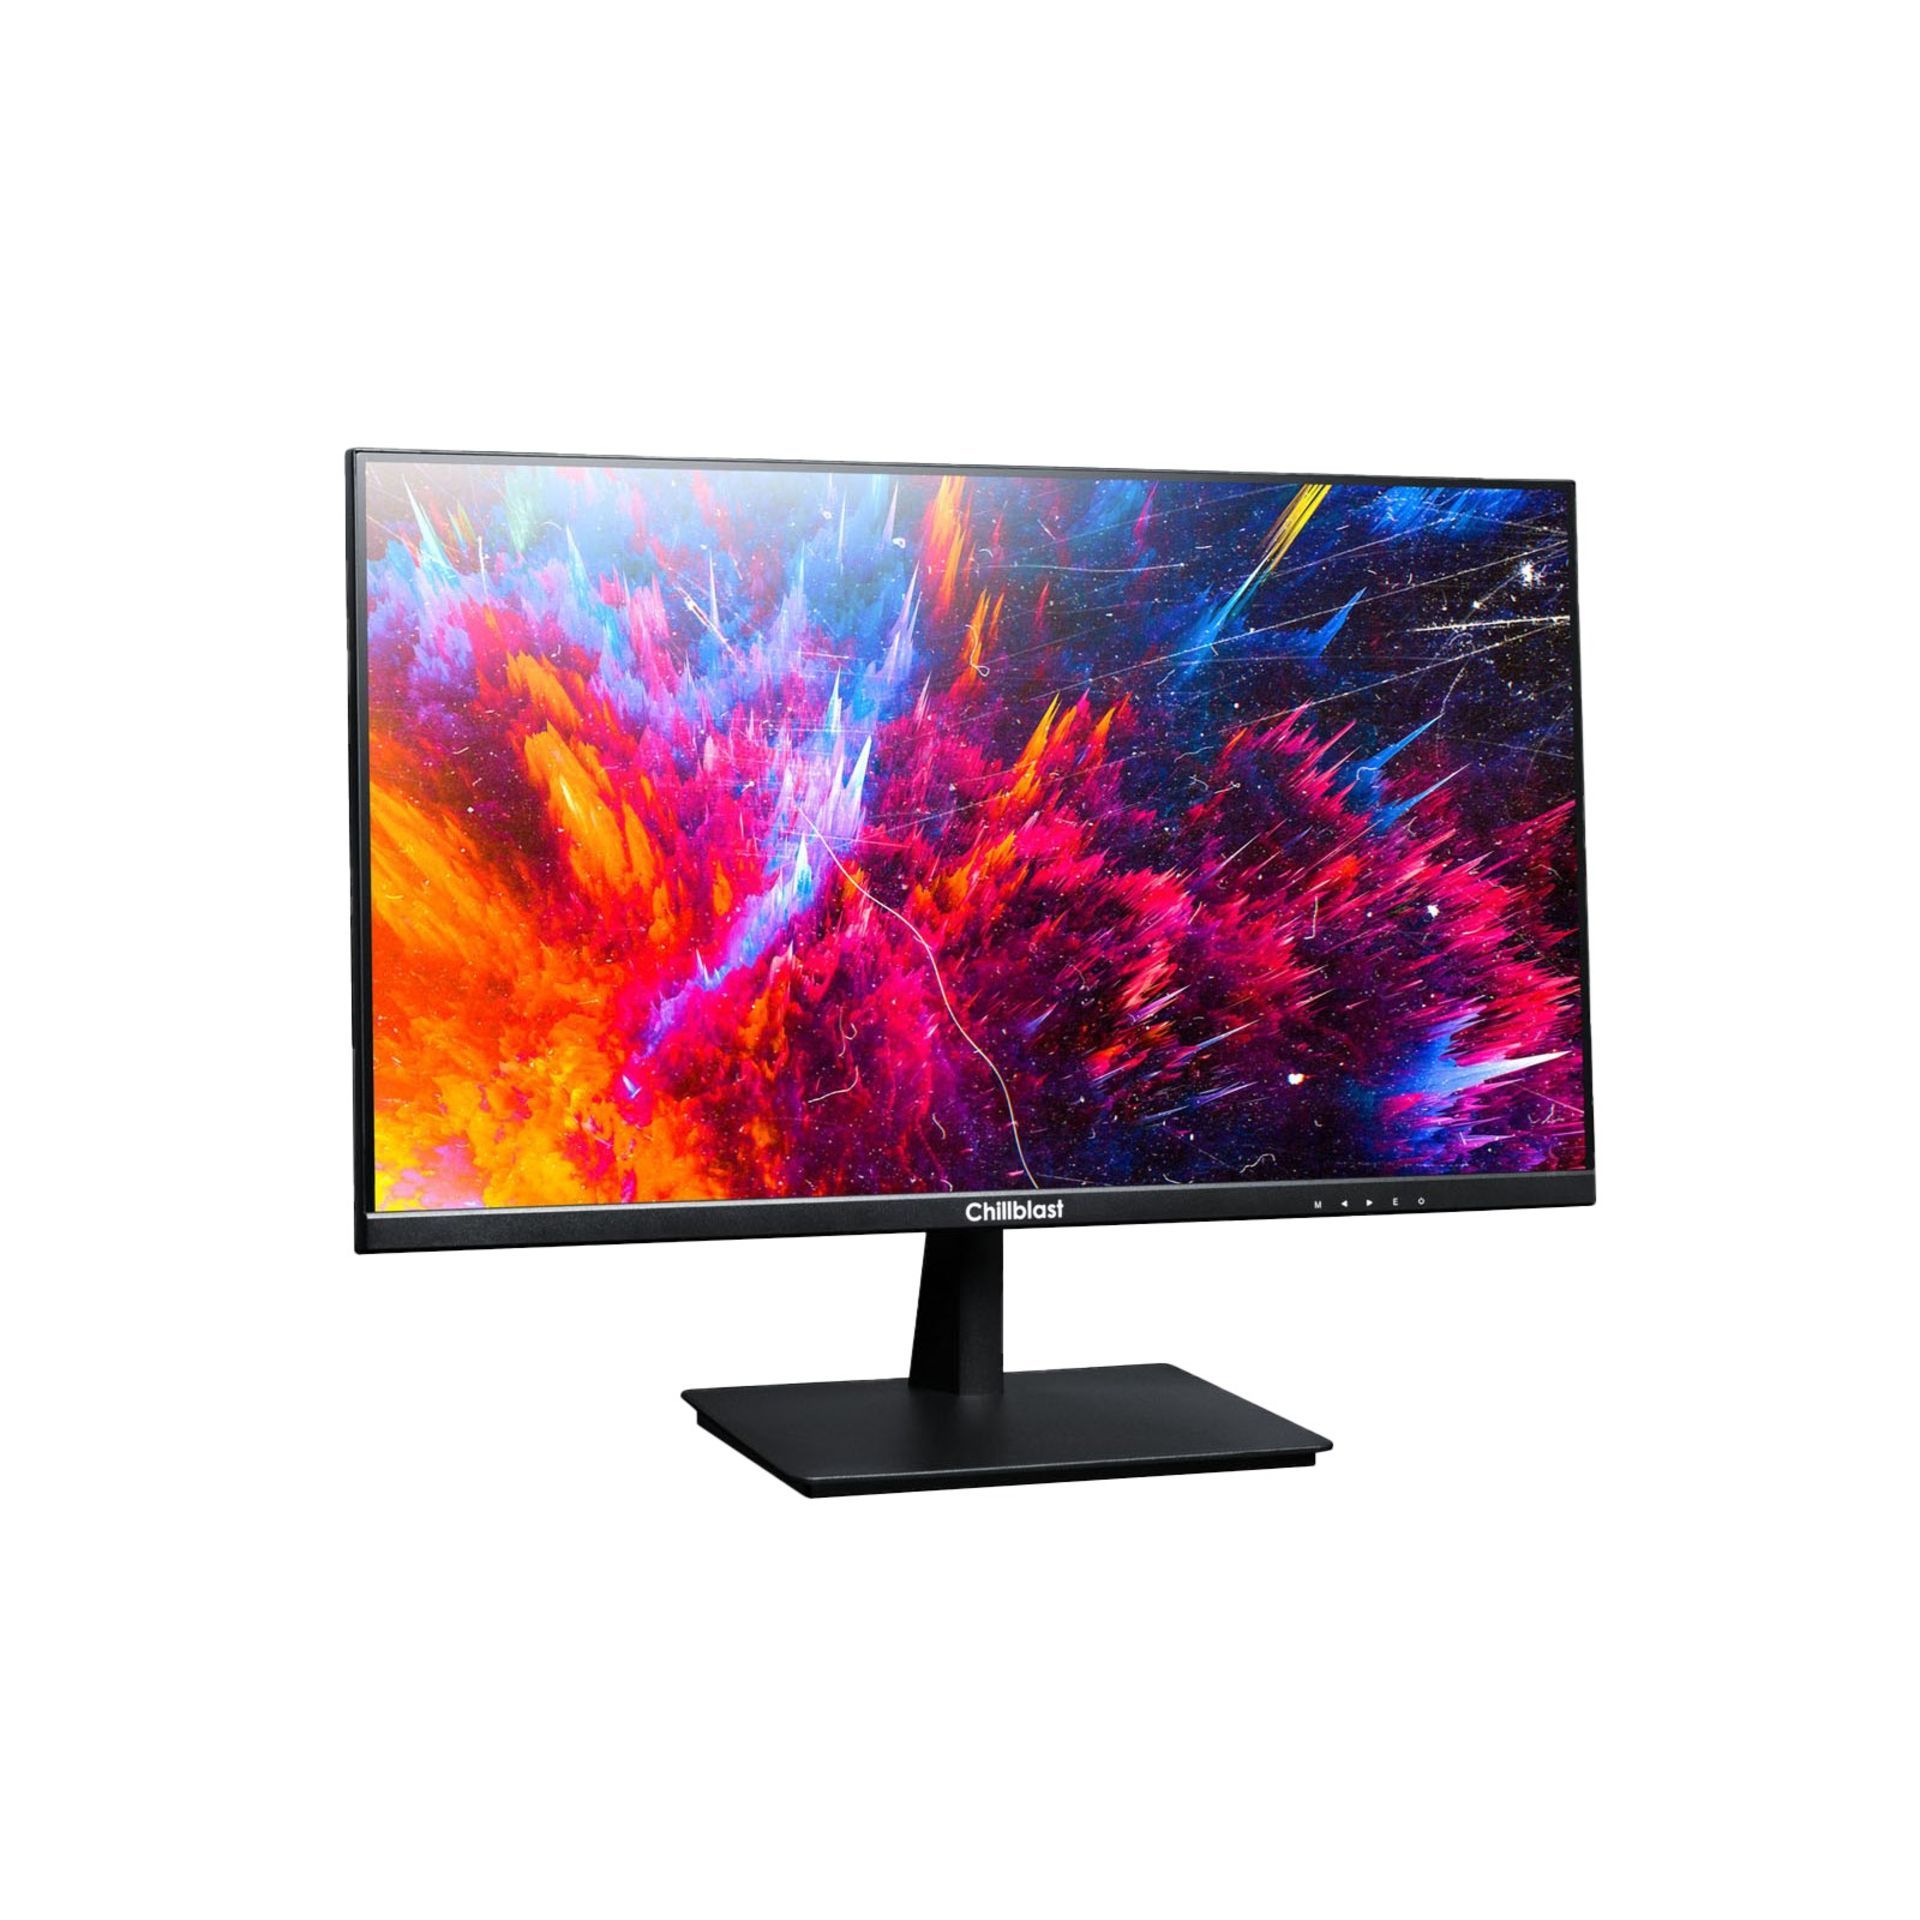 NEW & BOXED CHILLBLAST 24FHD100V1 24 Inch Full HD Gaming Monitor. RRP £129. (PCKBW). For gamers to